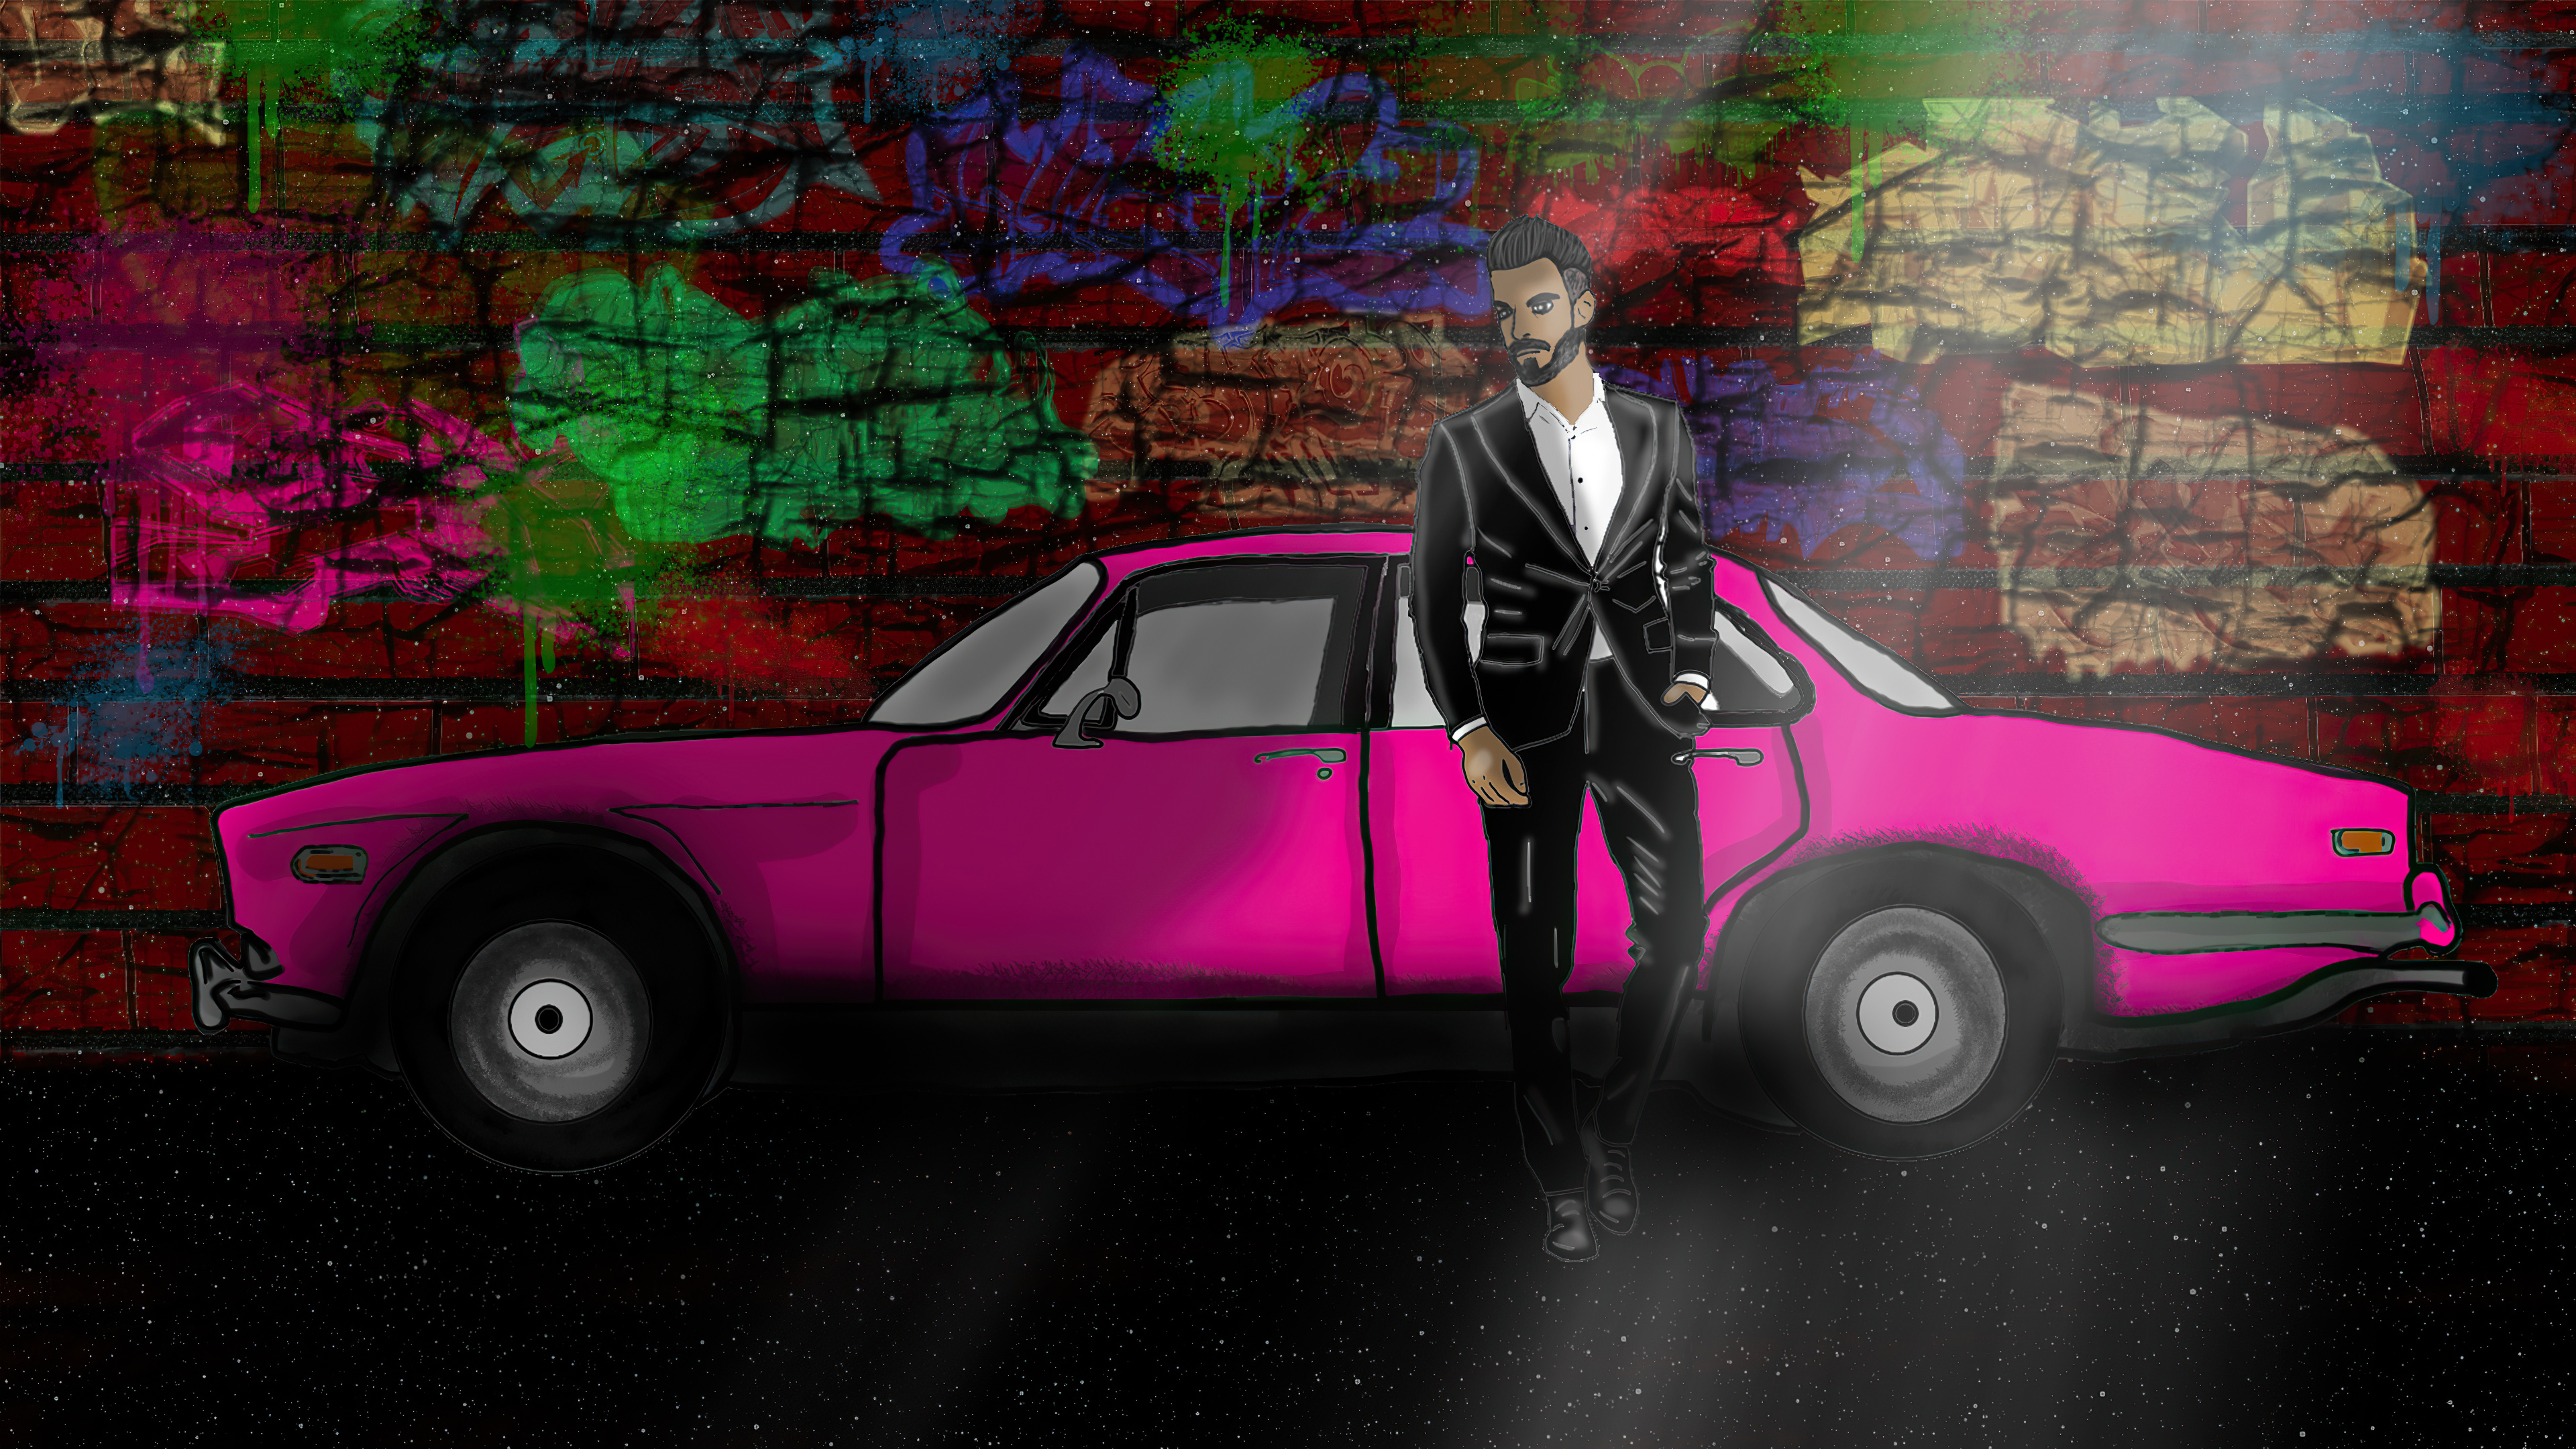 Cool Dude With Pink Car 4k walpapper